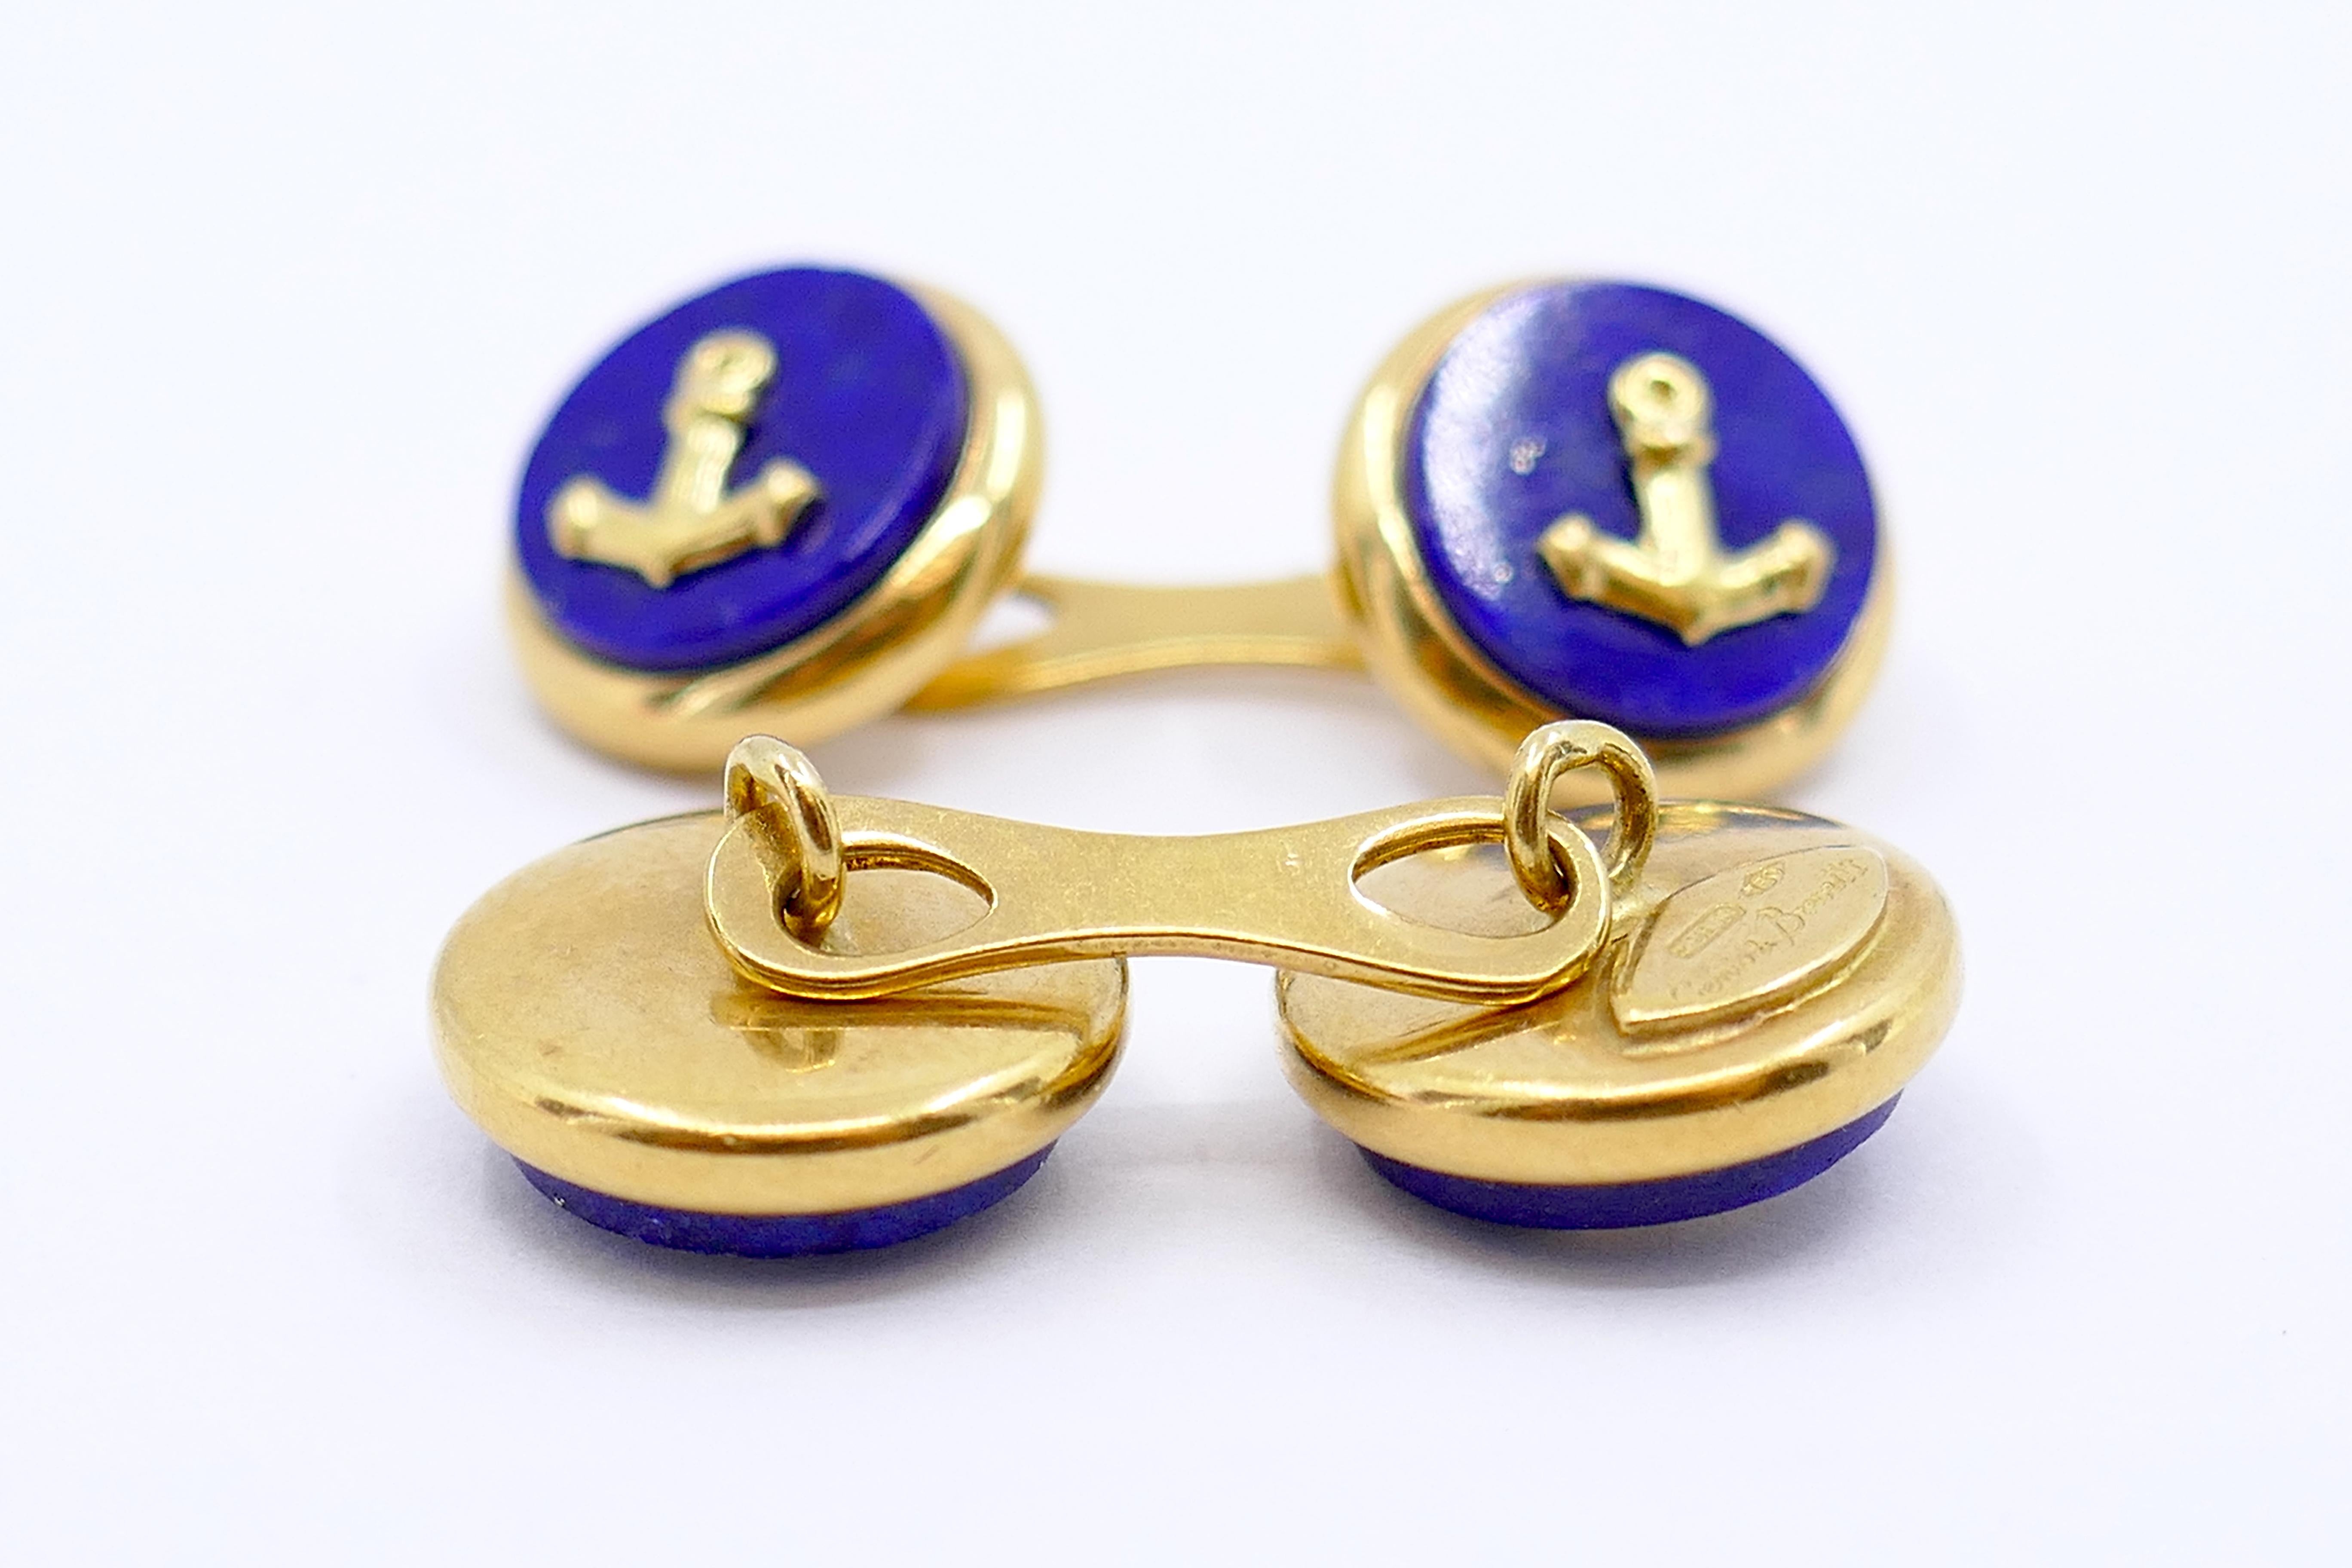 These cufflinks, crafted in Europe during the 1980s, are a testament to both style and craftsmanship. Designed by Genio & Brevetti, they showcase a nautical anchor motif, a symbol of strength and stability. Crafted from lapis lazuli, they feature